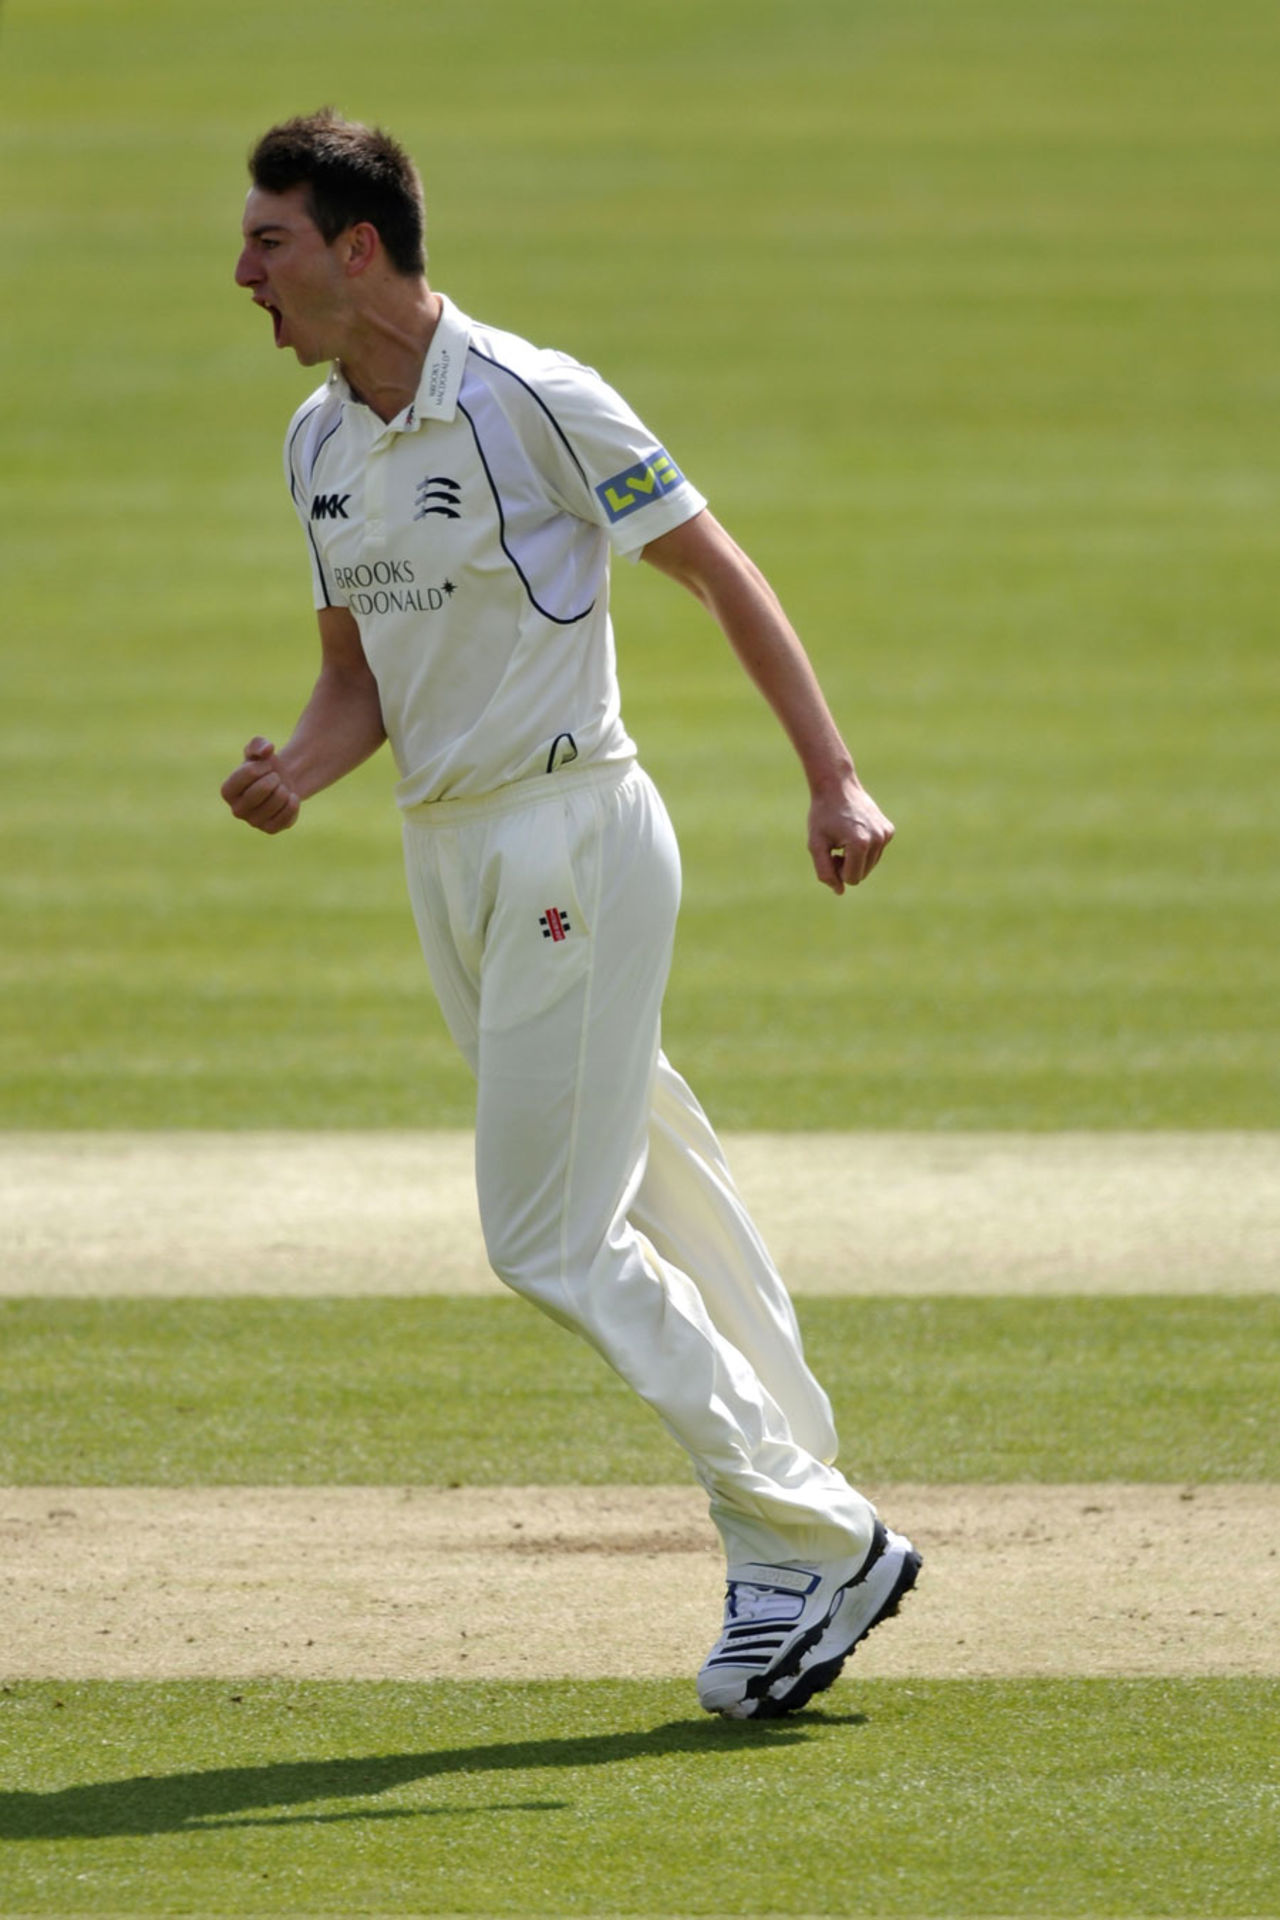 Toby Roland-Jones celebrates a wicket, Middlesex v Surrey, County Championship, Division One, April 12-15, 2012